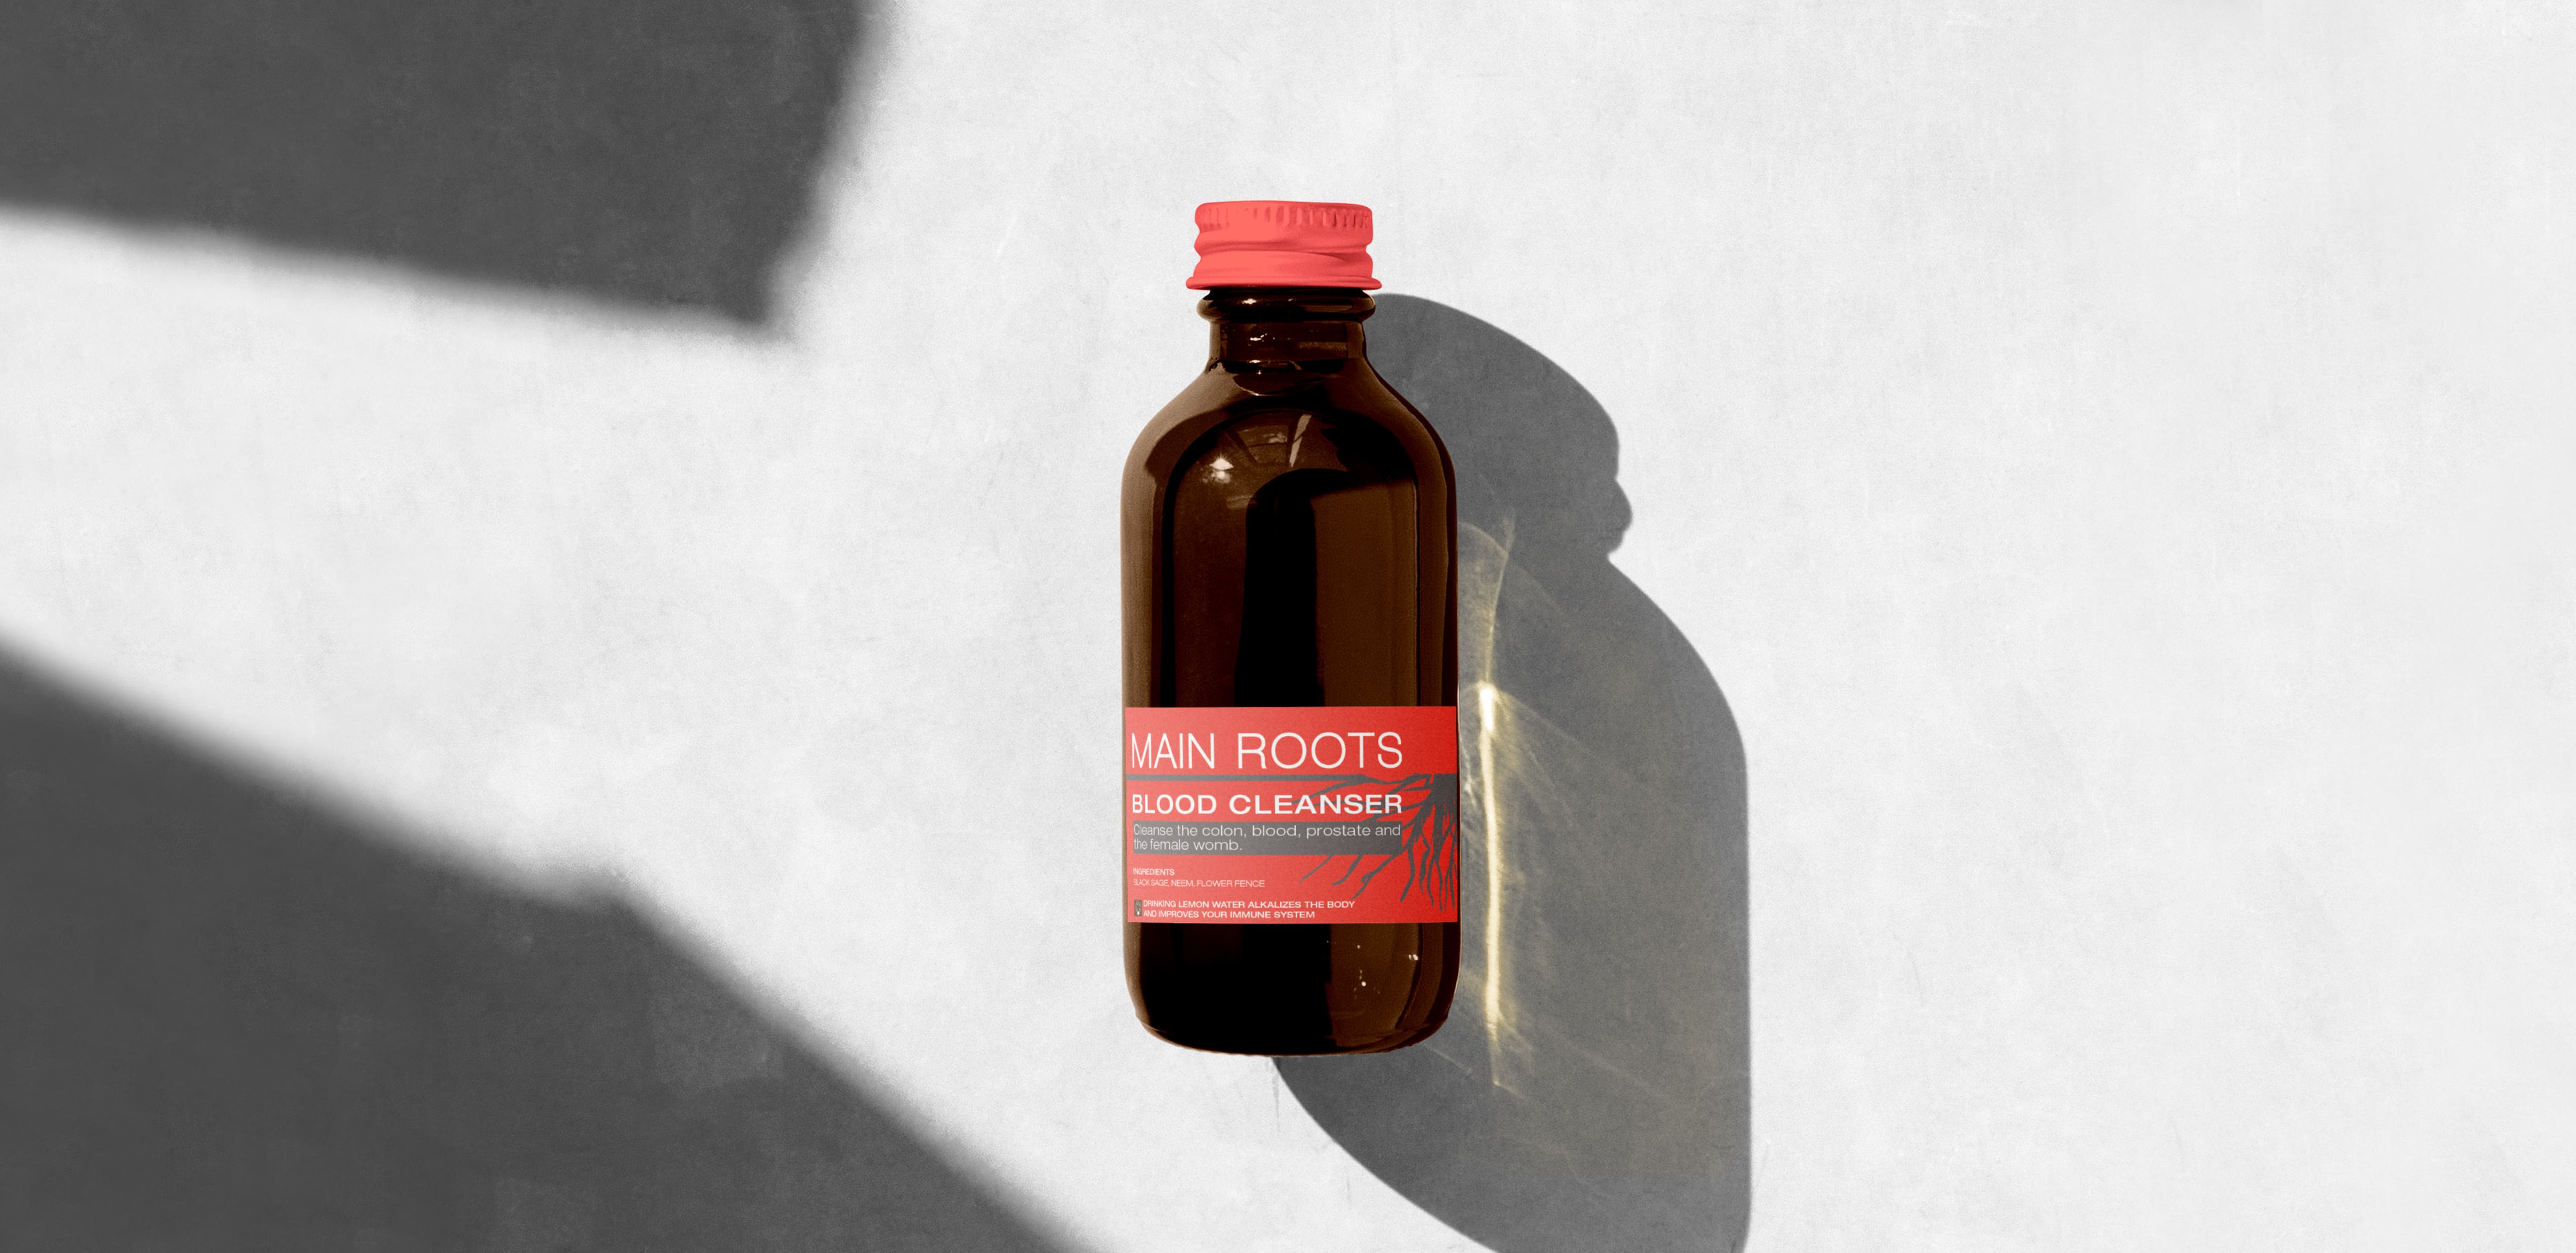 MAIN ROOTS BLOOD CLEANSER BRANDING